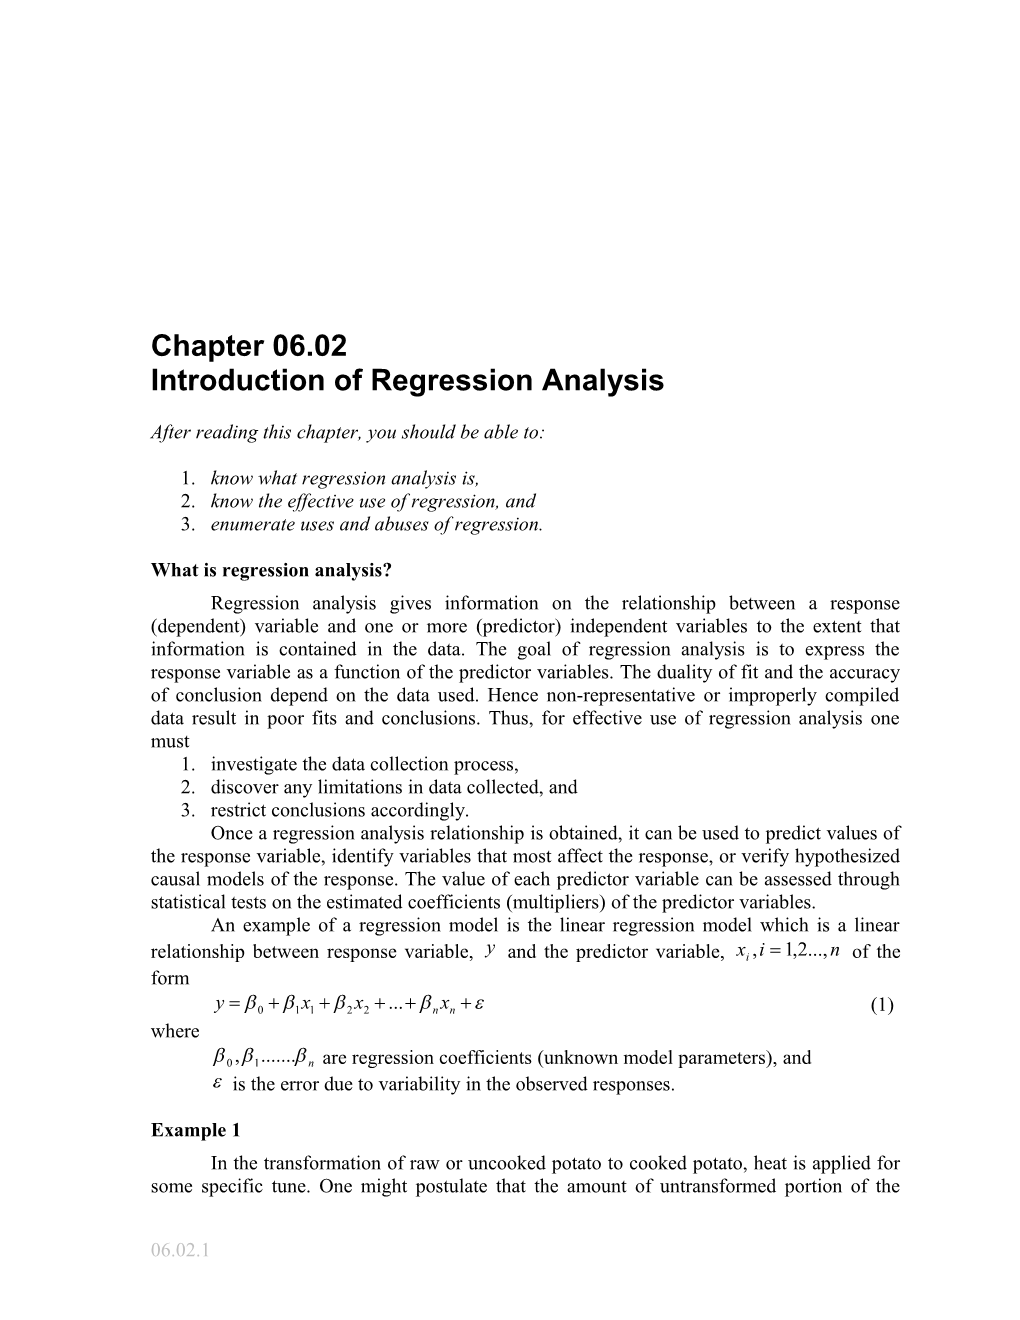 Introduction of Regression Analysis: Regression